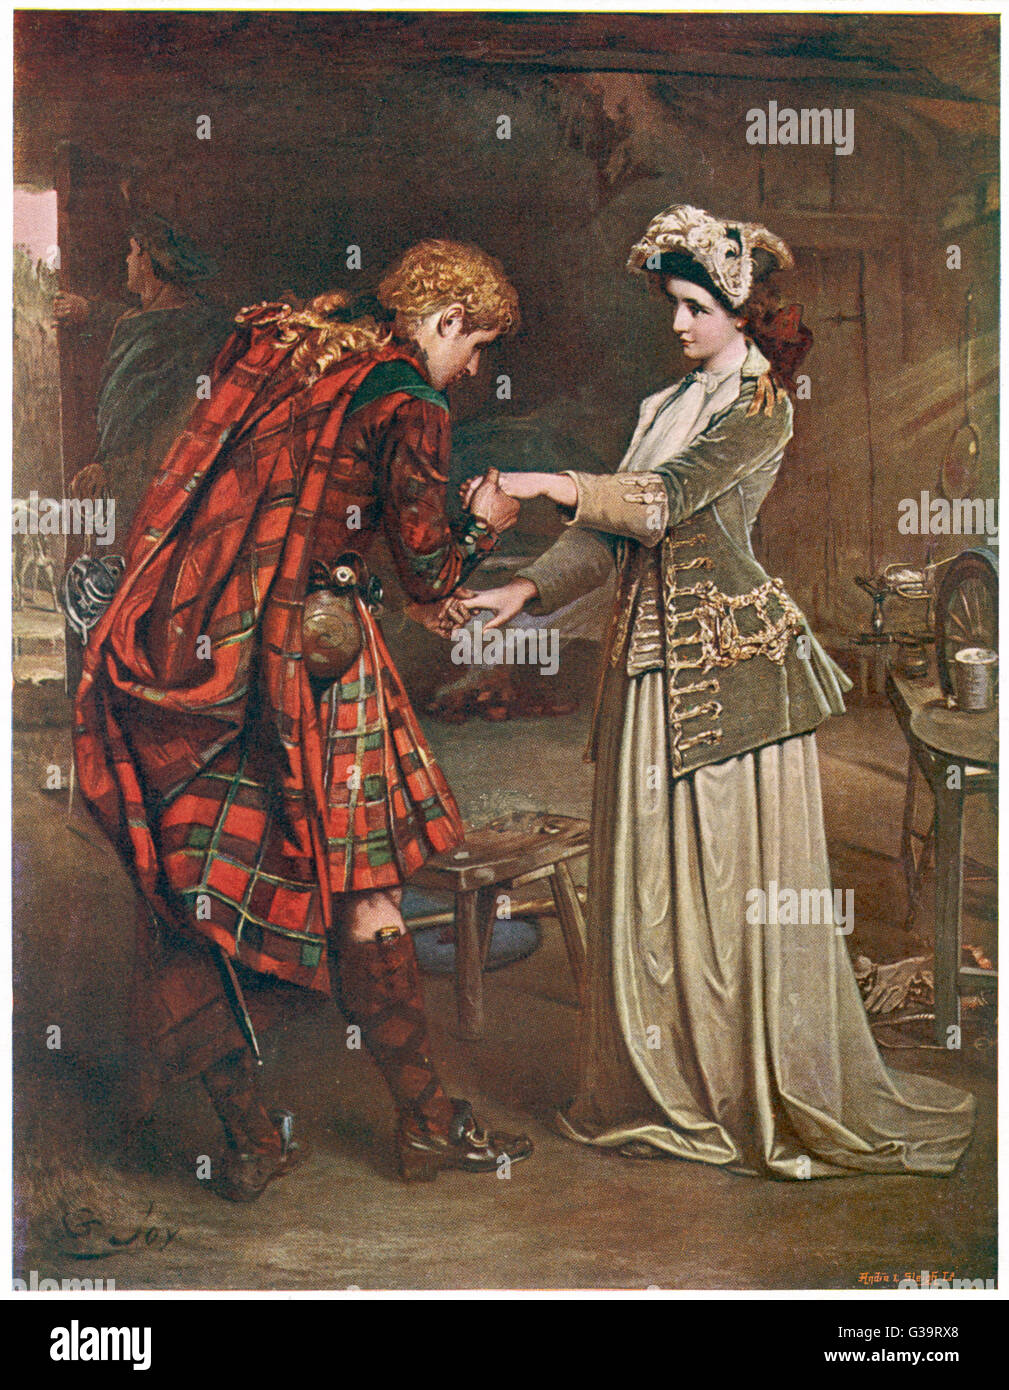 Prince Charles Edward Stuart  bids farewell to Flora  MacDonald who aided his  escape.      Date: 1746 Stock Photo